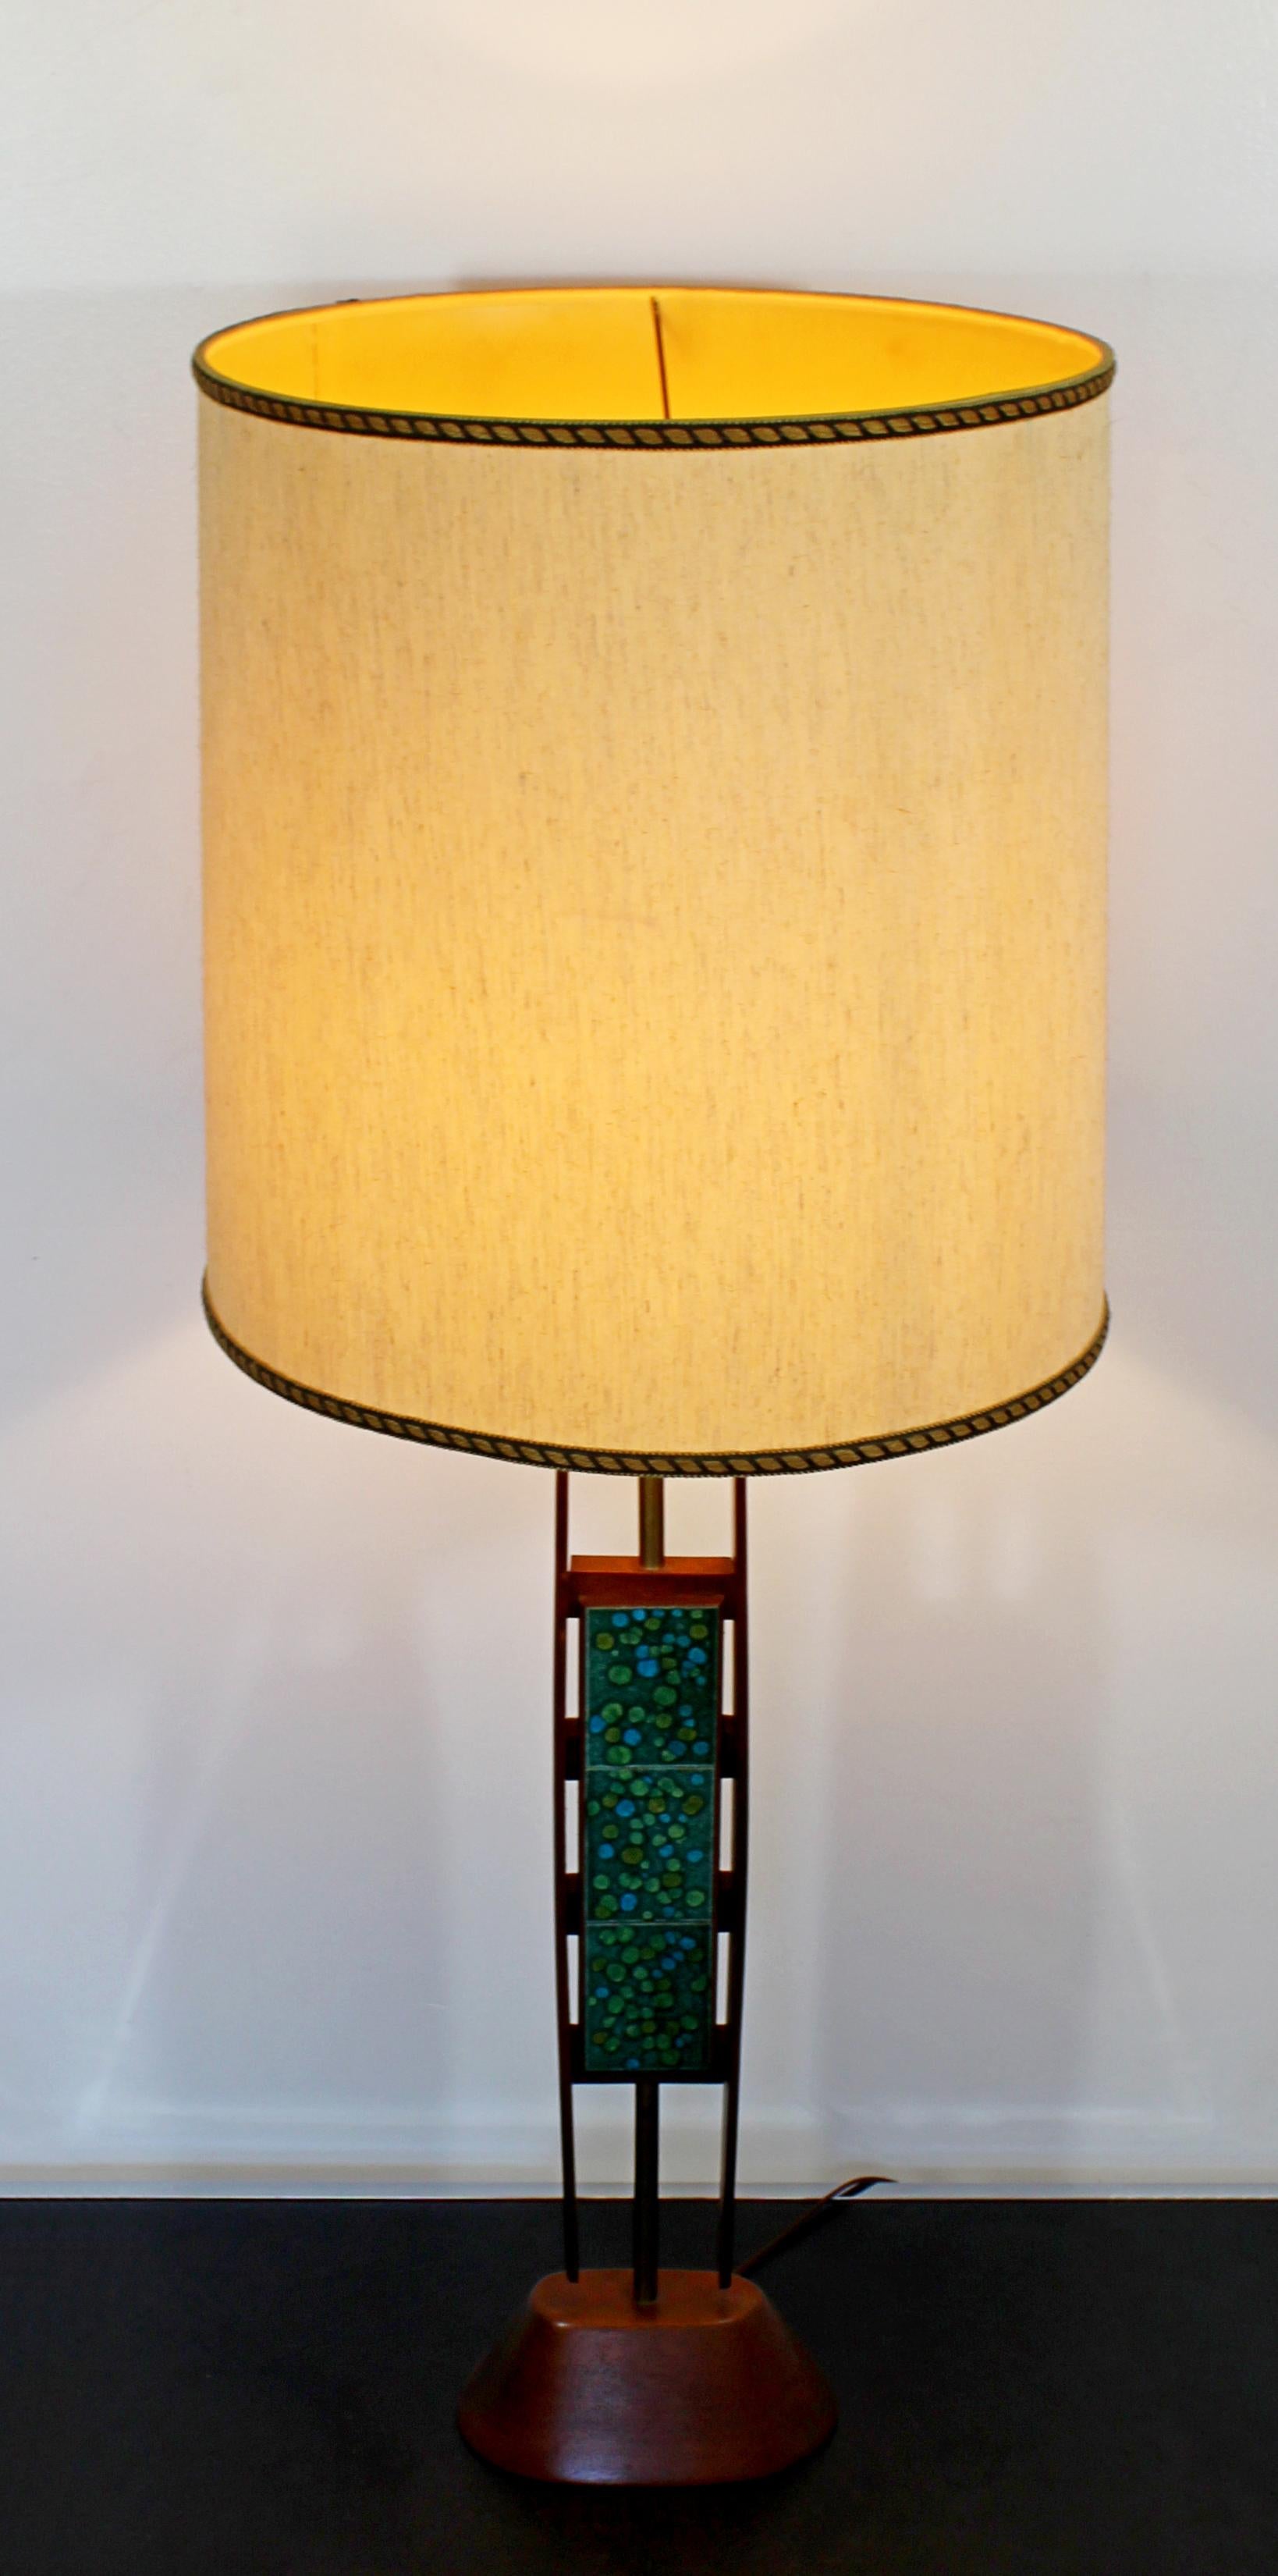 For your consideration is a stunning, teak table lamp, with a blue green enamel design, circa the 1960s. In excellent condition. The dimensions of the shade are 16